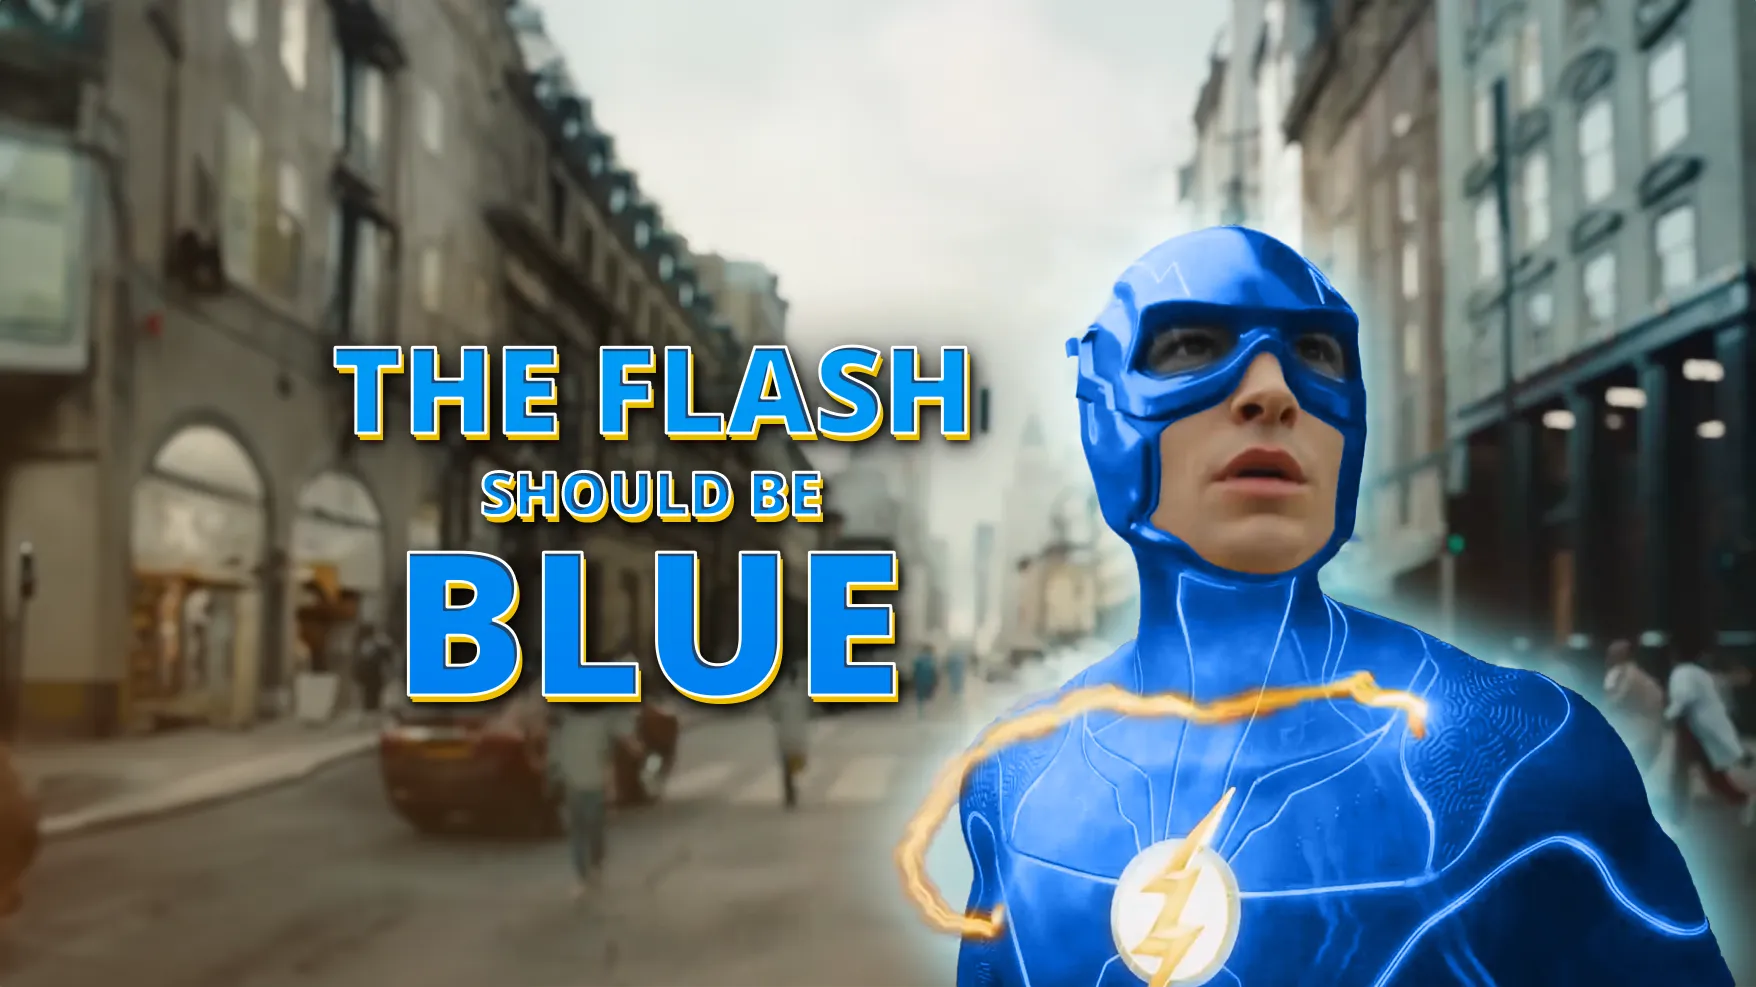 A blue version of The Flash